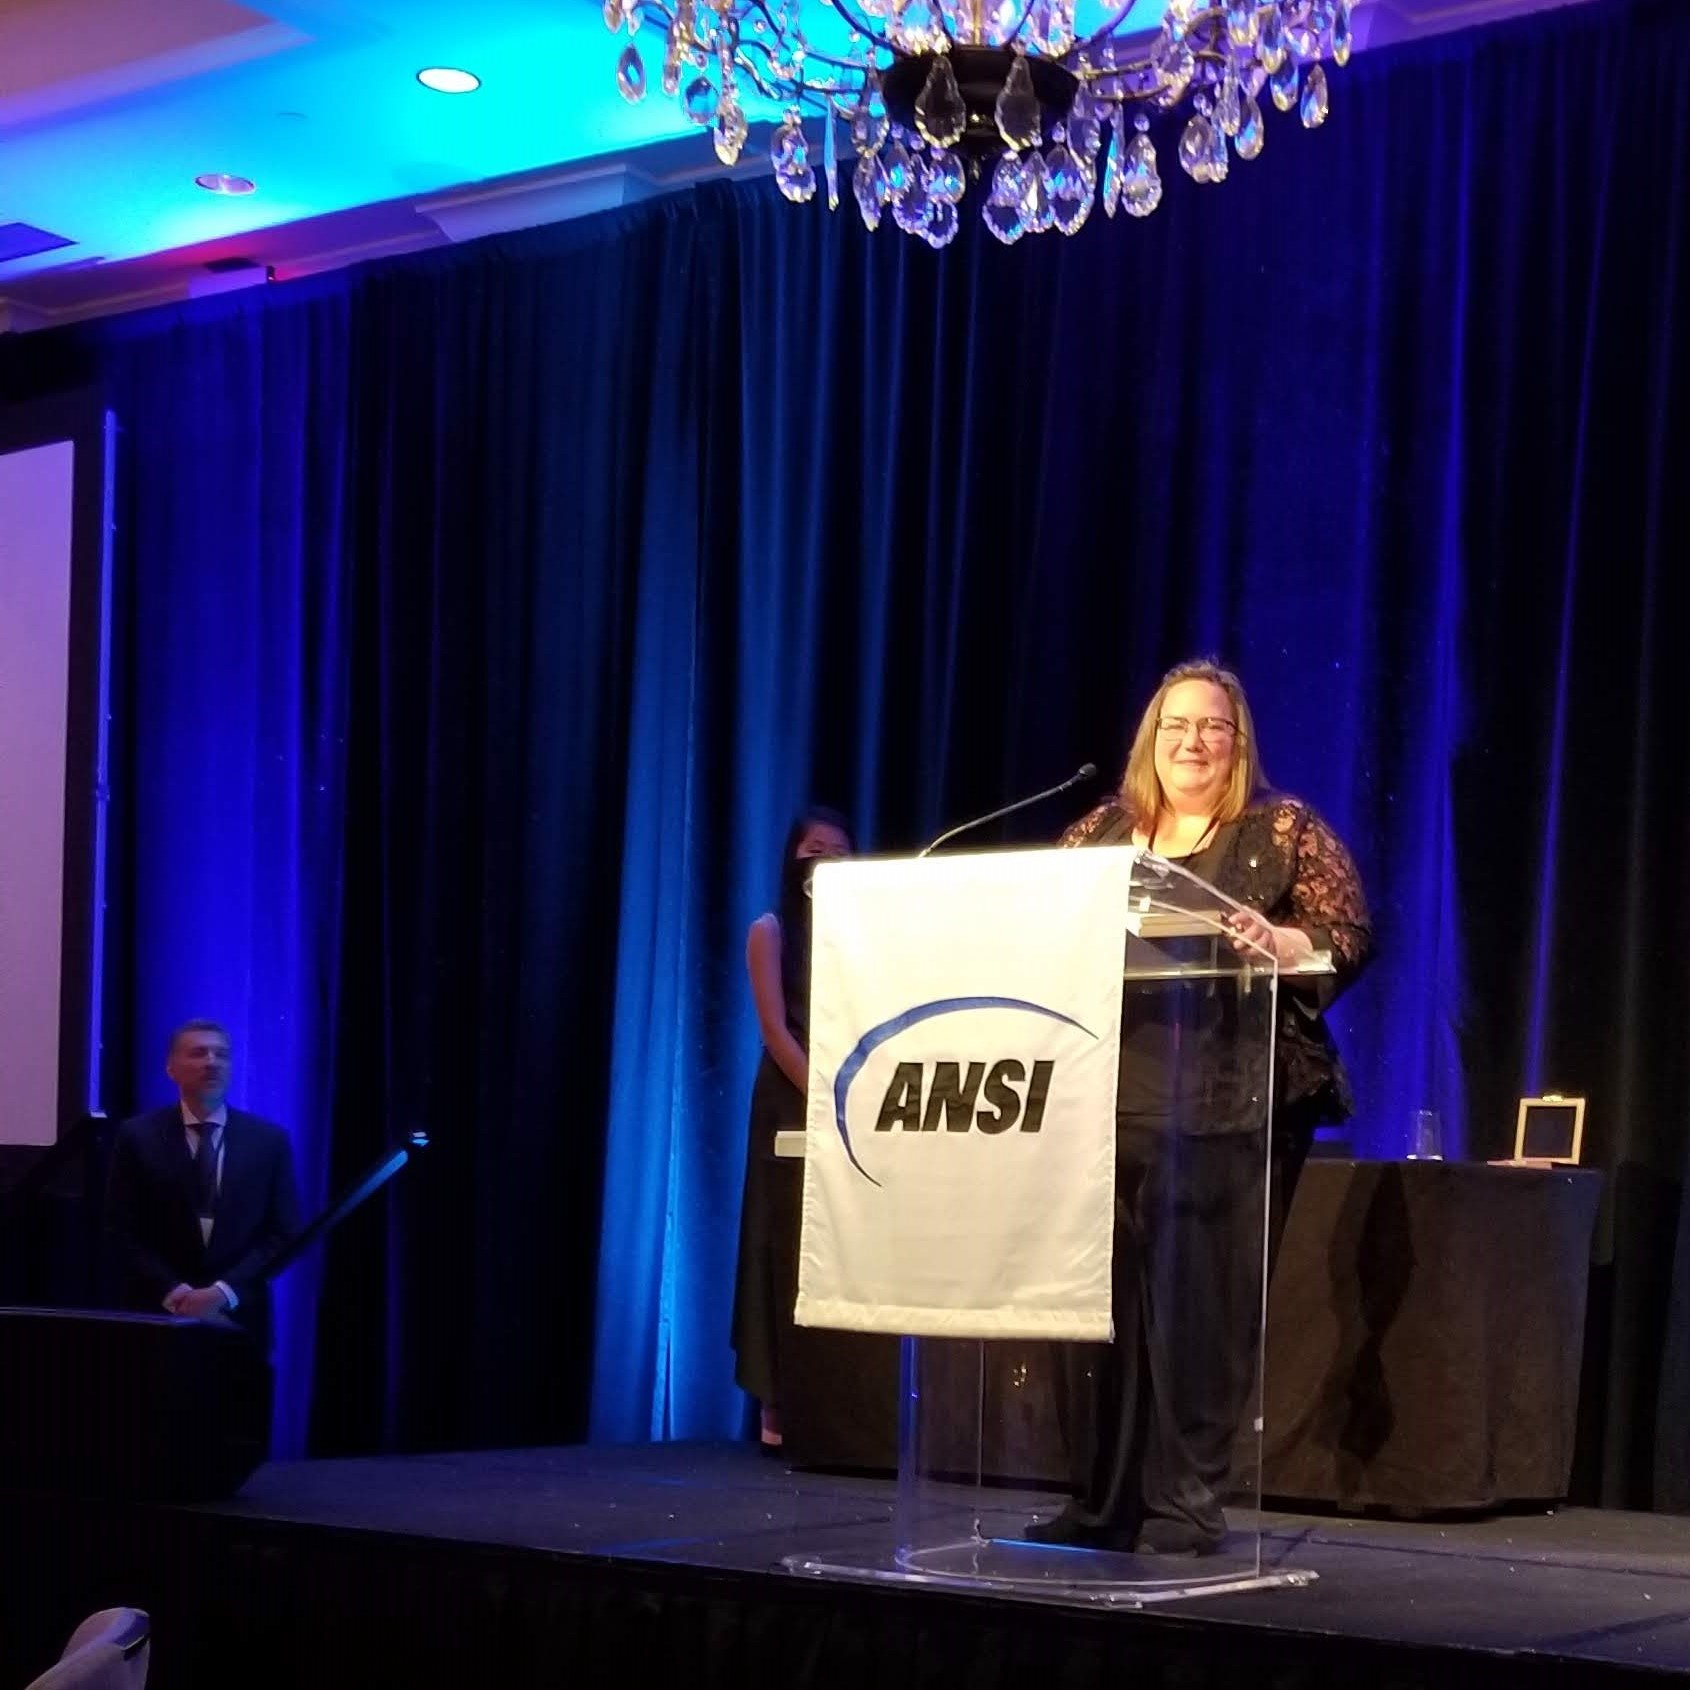 Sonya Bird receives the Howard Coonley Medal from the American National Standards Institute (ANSI) at the 2021 ANSI World Standards Week Celebration in Washington, D.C.